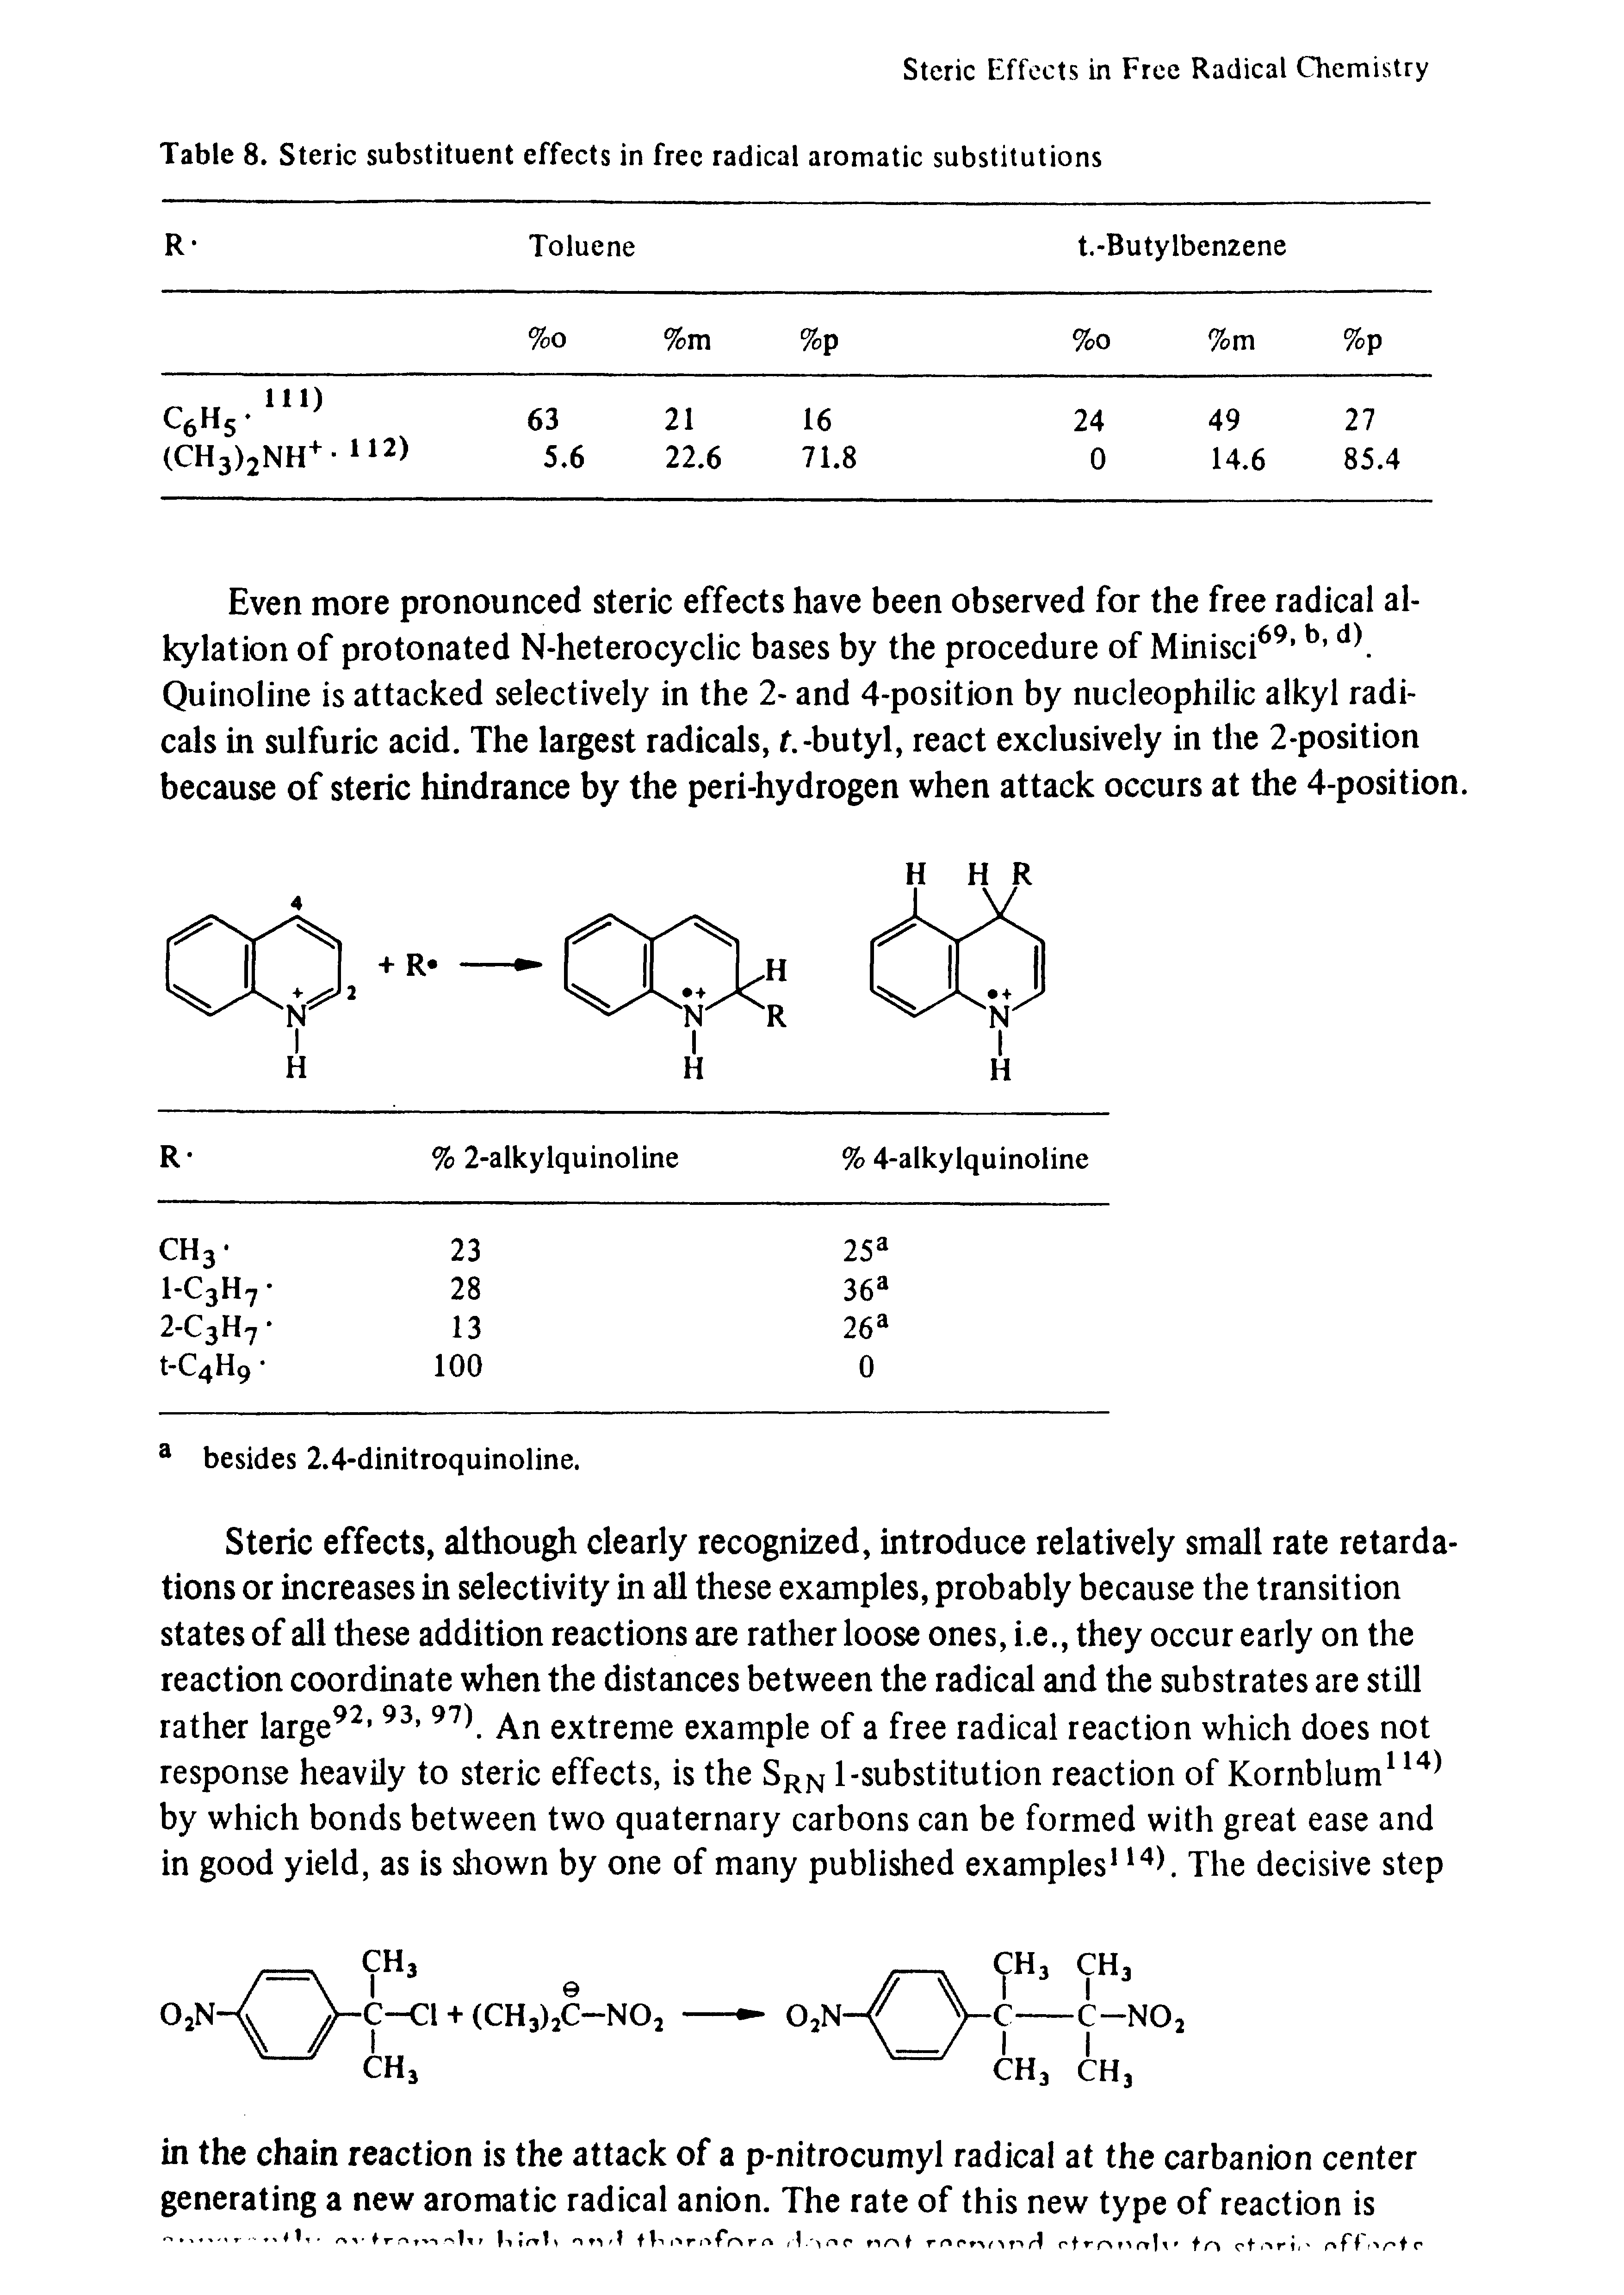 Table 8. Steric substituent effects in free radical aromatic substitutions...